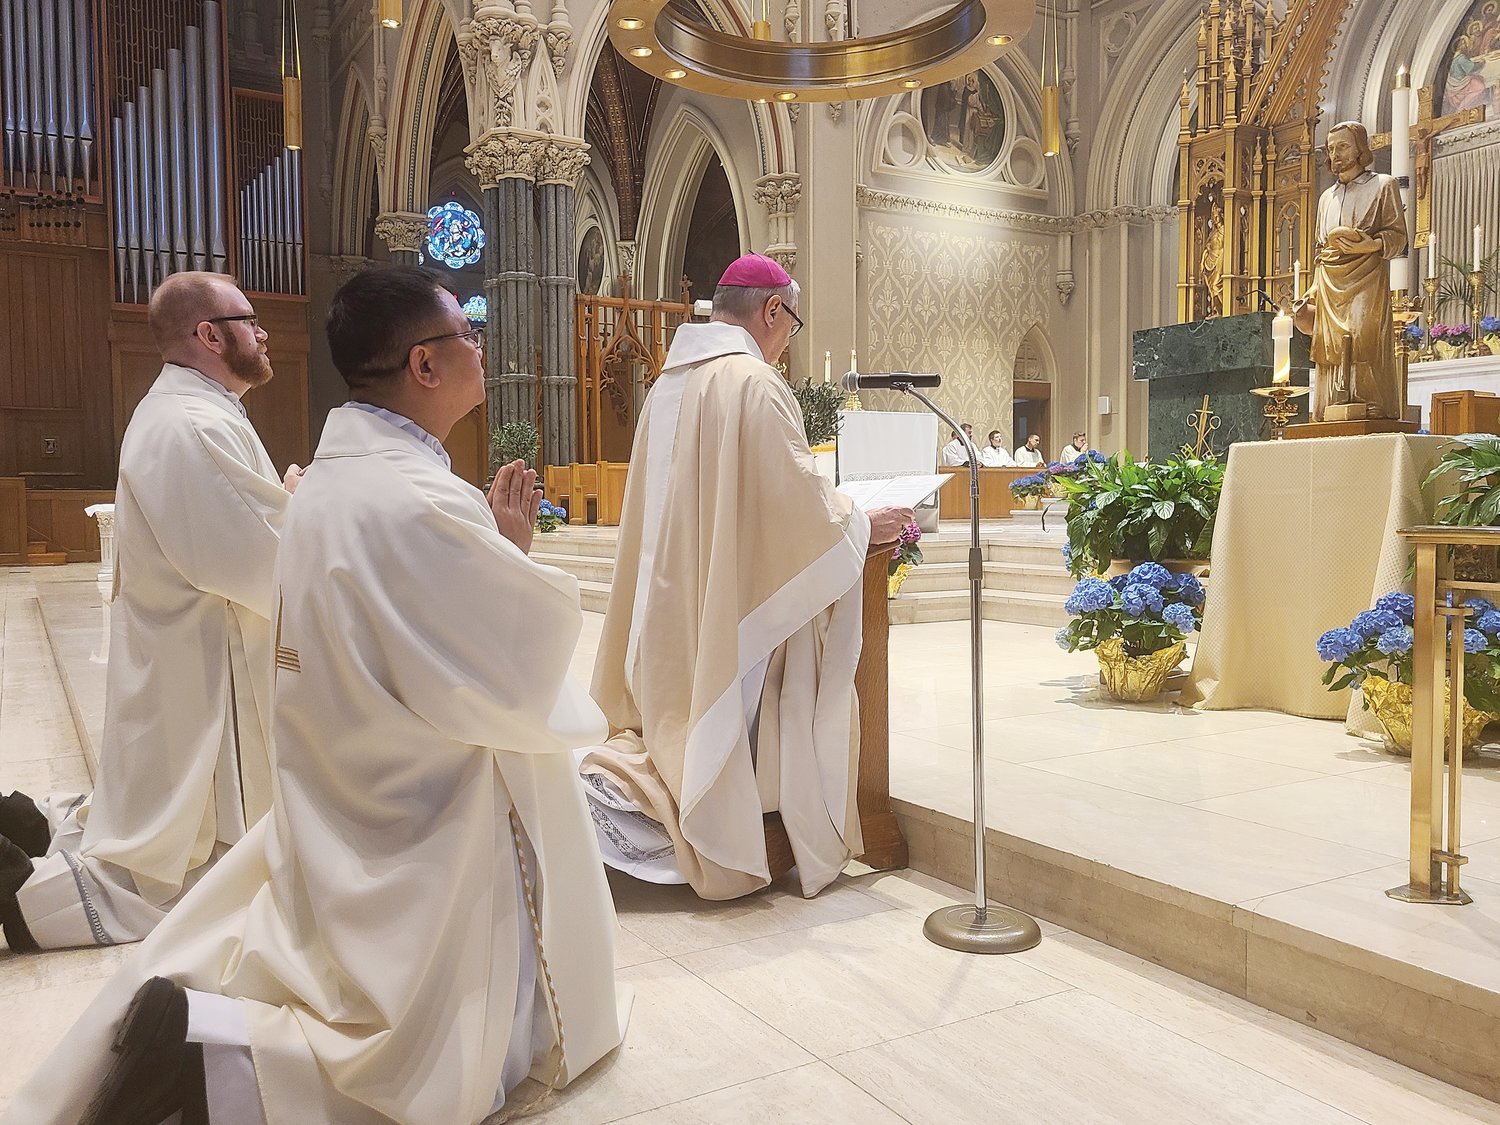 Bishop Thomas J. Tobin leads the Litany of St. Joseph during Mass at the Cathedral of Saints Peter and Paul to honor the memorial of St. Joseph the Worker on May 1.